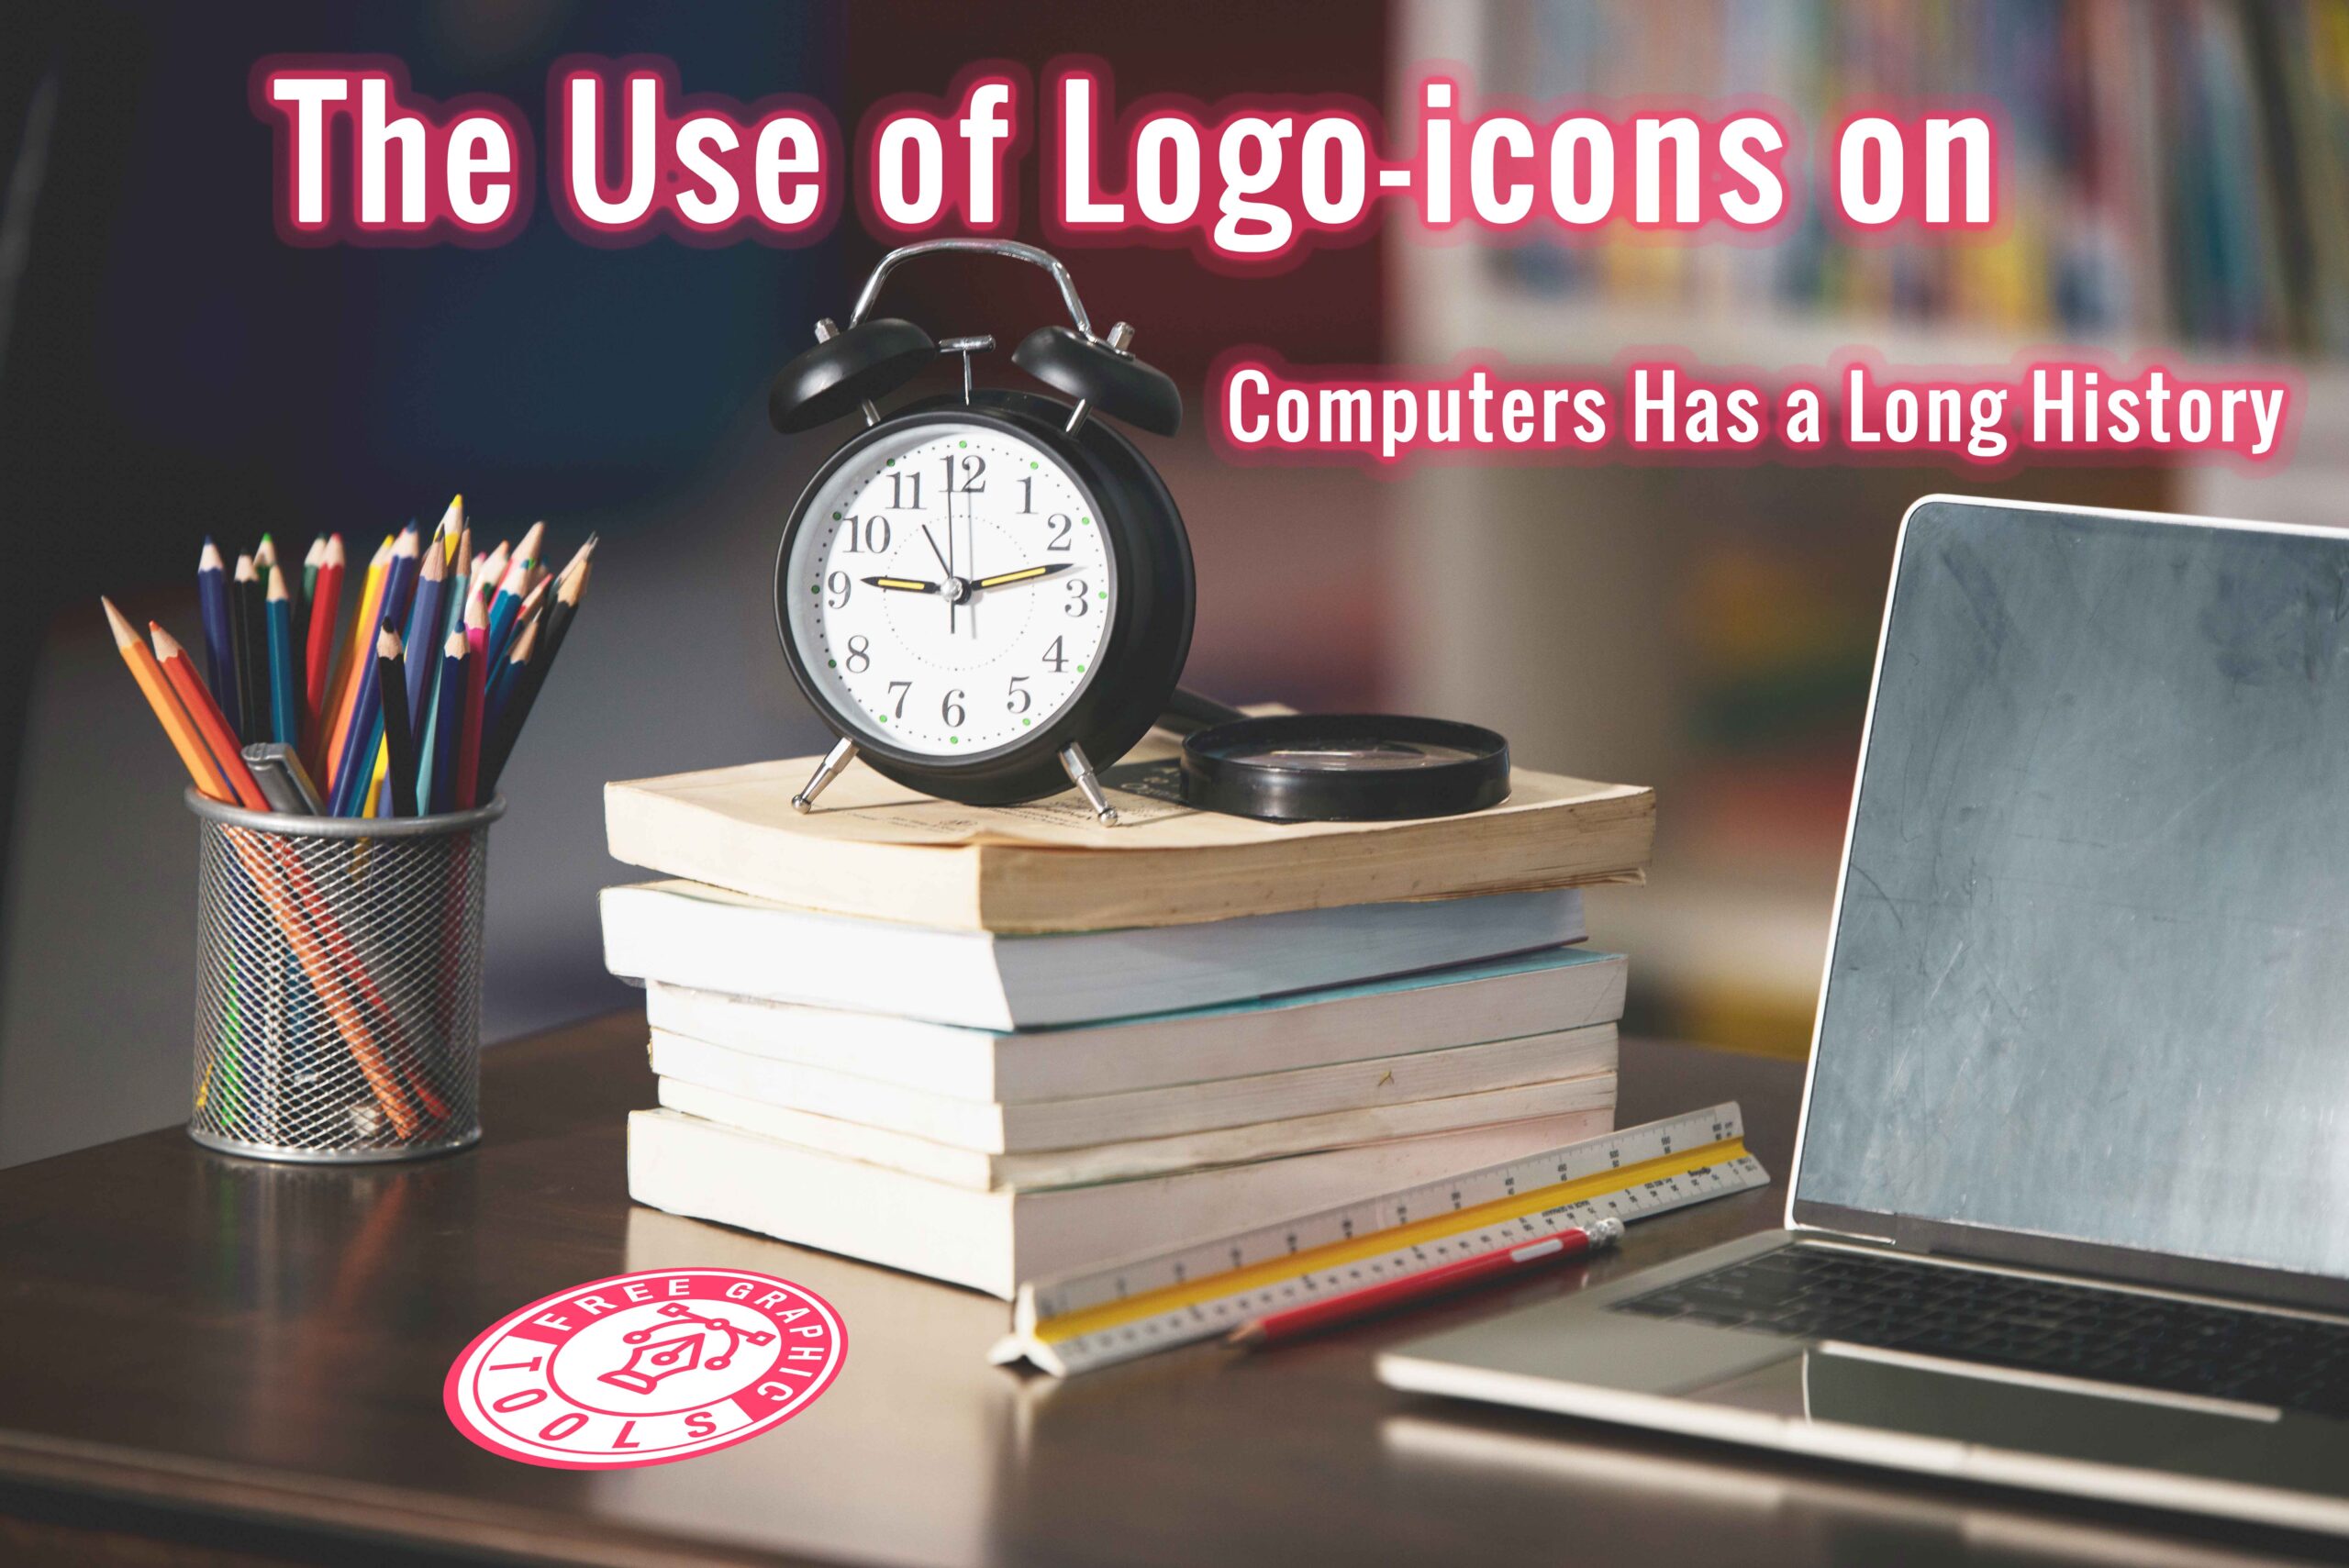 The Use of Logo-icons on Computers Has a Long History
Painting Served As The Ancient People’s Written Language.
In Information Technology, The Use Of Logos Or Symbols To Communicate The Meaning Of Many Words In A Few Words Is Also Important.
In This Talk, I Will Attempt To Express The Logo And Its Practical Evolution At Various Eras.

1981 Year

The First Computer With A Graphical User Interface Was The Xerox 8010 Star.
Despite The Fact That This Computer Is Not Marketed Outside Of The United States, It Was The First To Offer The Concept Of Icons For Calculators, Folders, And Emails.

1983 Year

On The Lisa, Apple Includes Numerous Icon-based Apps, Including A Drop-down Menu.
With The Help Of The Dropdown Menus, Higher-quality Icons Are Utilized Here.
It Is Essentially Based On The Xerox Concept.

1984 Year

A Year Later, Artists Created The Apple Macintosh Computer, Which Allowed Them To Create Even More Sophisticated Icons.
This Computer Was Essential In Apple’s Early Economic Success.

1985 Year

It wasn’t merely a matter of getting the next job. For their small and basic system, Atari TOS created icons.


The First Four-color Icons Are Found on Amiga 1000.


The First Graphical User Interface Was Built By Windows.
It Has Several New Icons, Despite The Fact That It Does Not Utilize Colored Icons.

1991 Year

Macintosh 8.0 Was The First Color Operating System. Clicking On The Icons Will Also Bring Up The System.

1992 Year

With Windows 3.1, A Year Later, Microsoft Released Their World-class Operating System.
It Makes Use Of Bright And Well-designed Icons.

1995 Year

On The Windows 95 Operating System, The Usage Of Microsoft’s Iconic Start Button And The Icon In The Program List Appears First.

2001 Year

In 2001, Mac Windows Symbols Surpassed Their Own In Brightness.

2007 Year

Mac’s Famous Concept Gained A Lot Of Traction.
The Use Of Shadows On The Icons Gives A Three-dimensional Effect.

2009 Year

By Glancing At The Windows 7 Icons, You Can See Wha